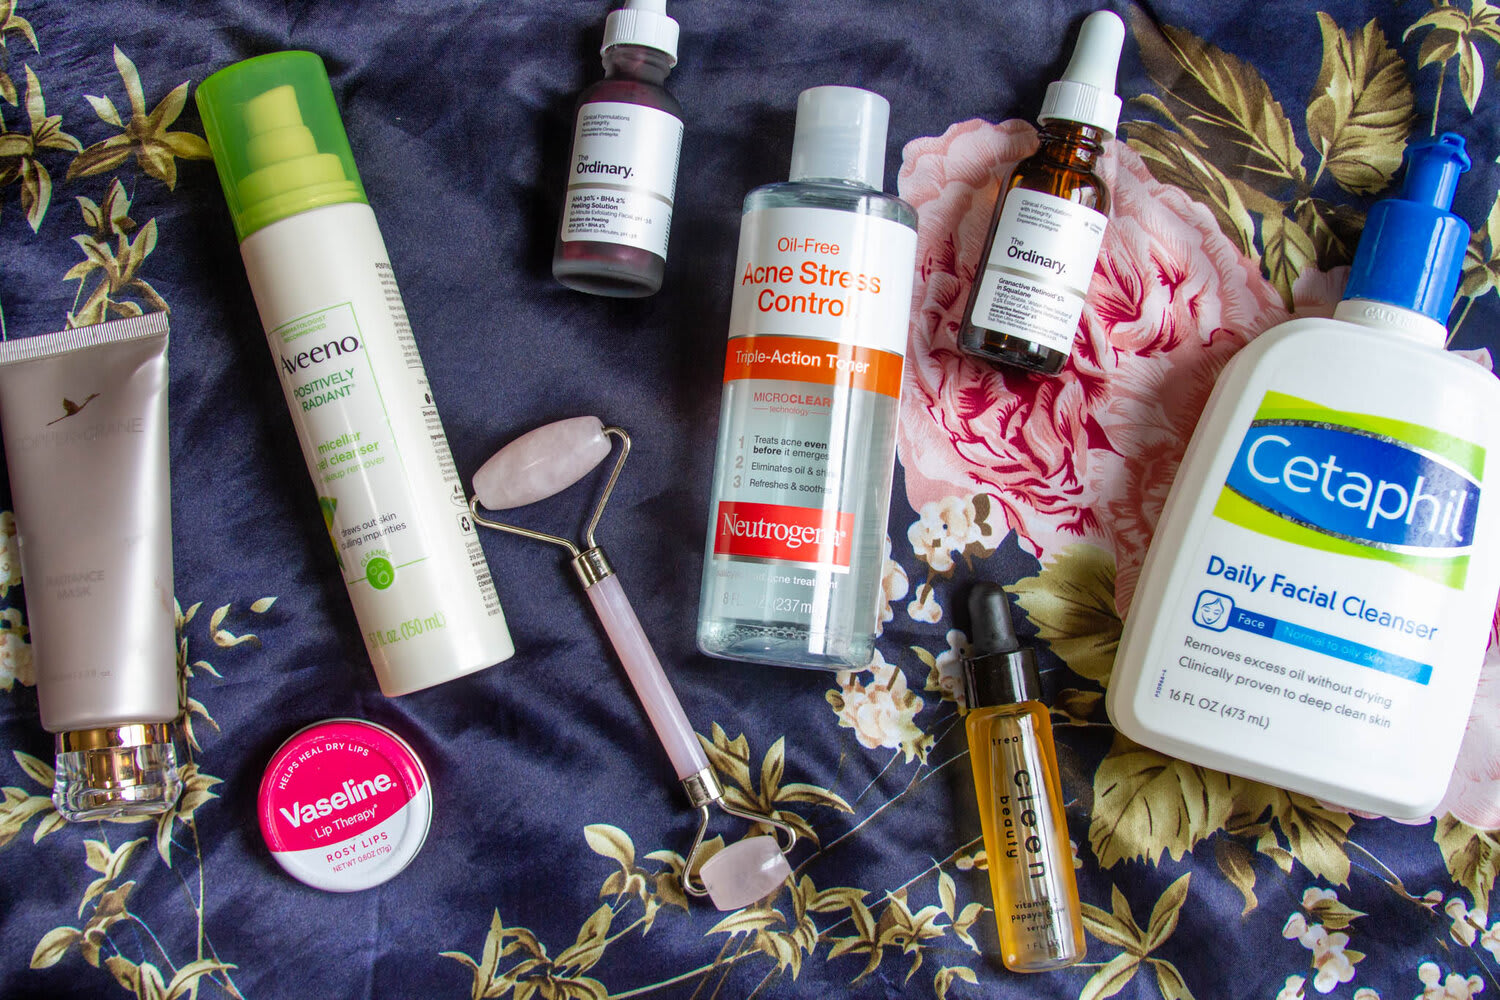 A Simple Nighttime Skin Care Routine For A Flawless Complexion